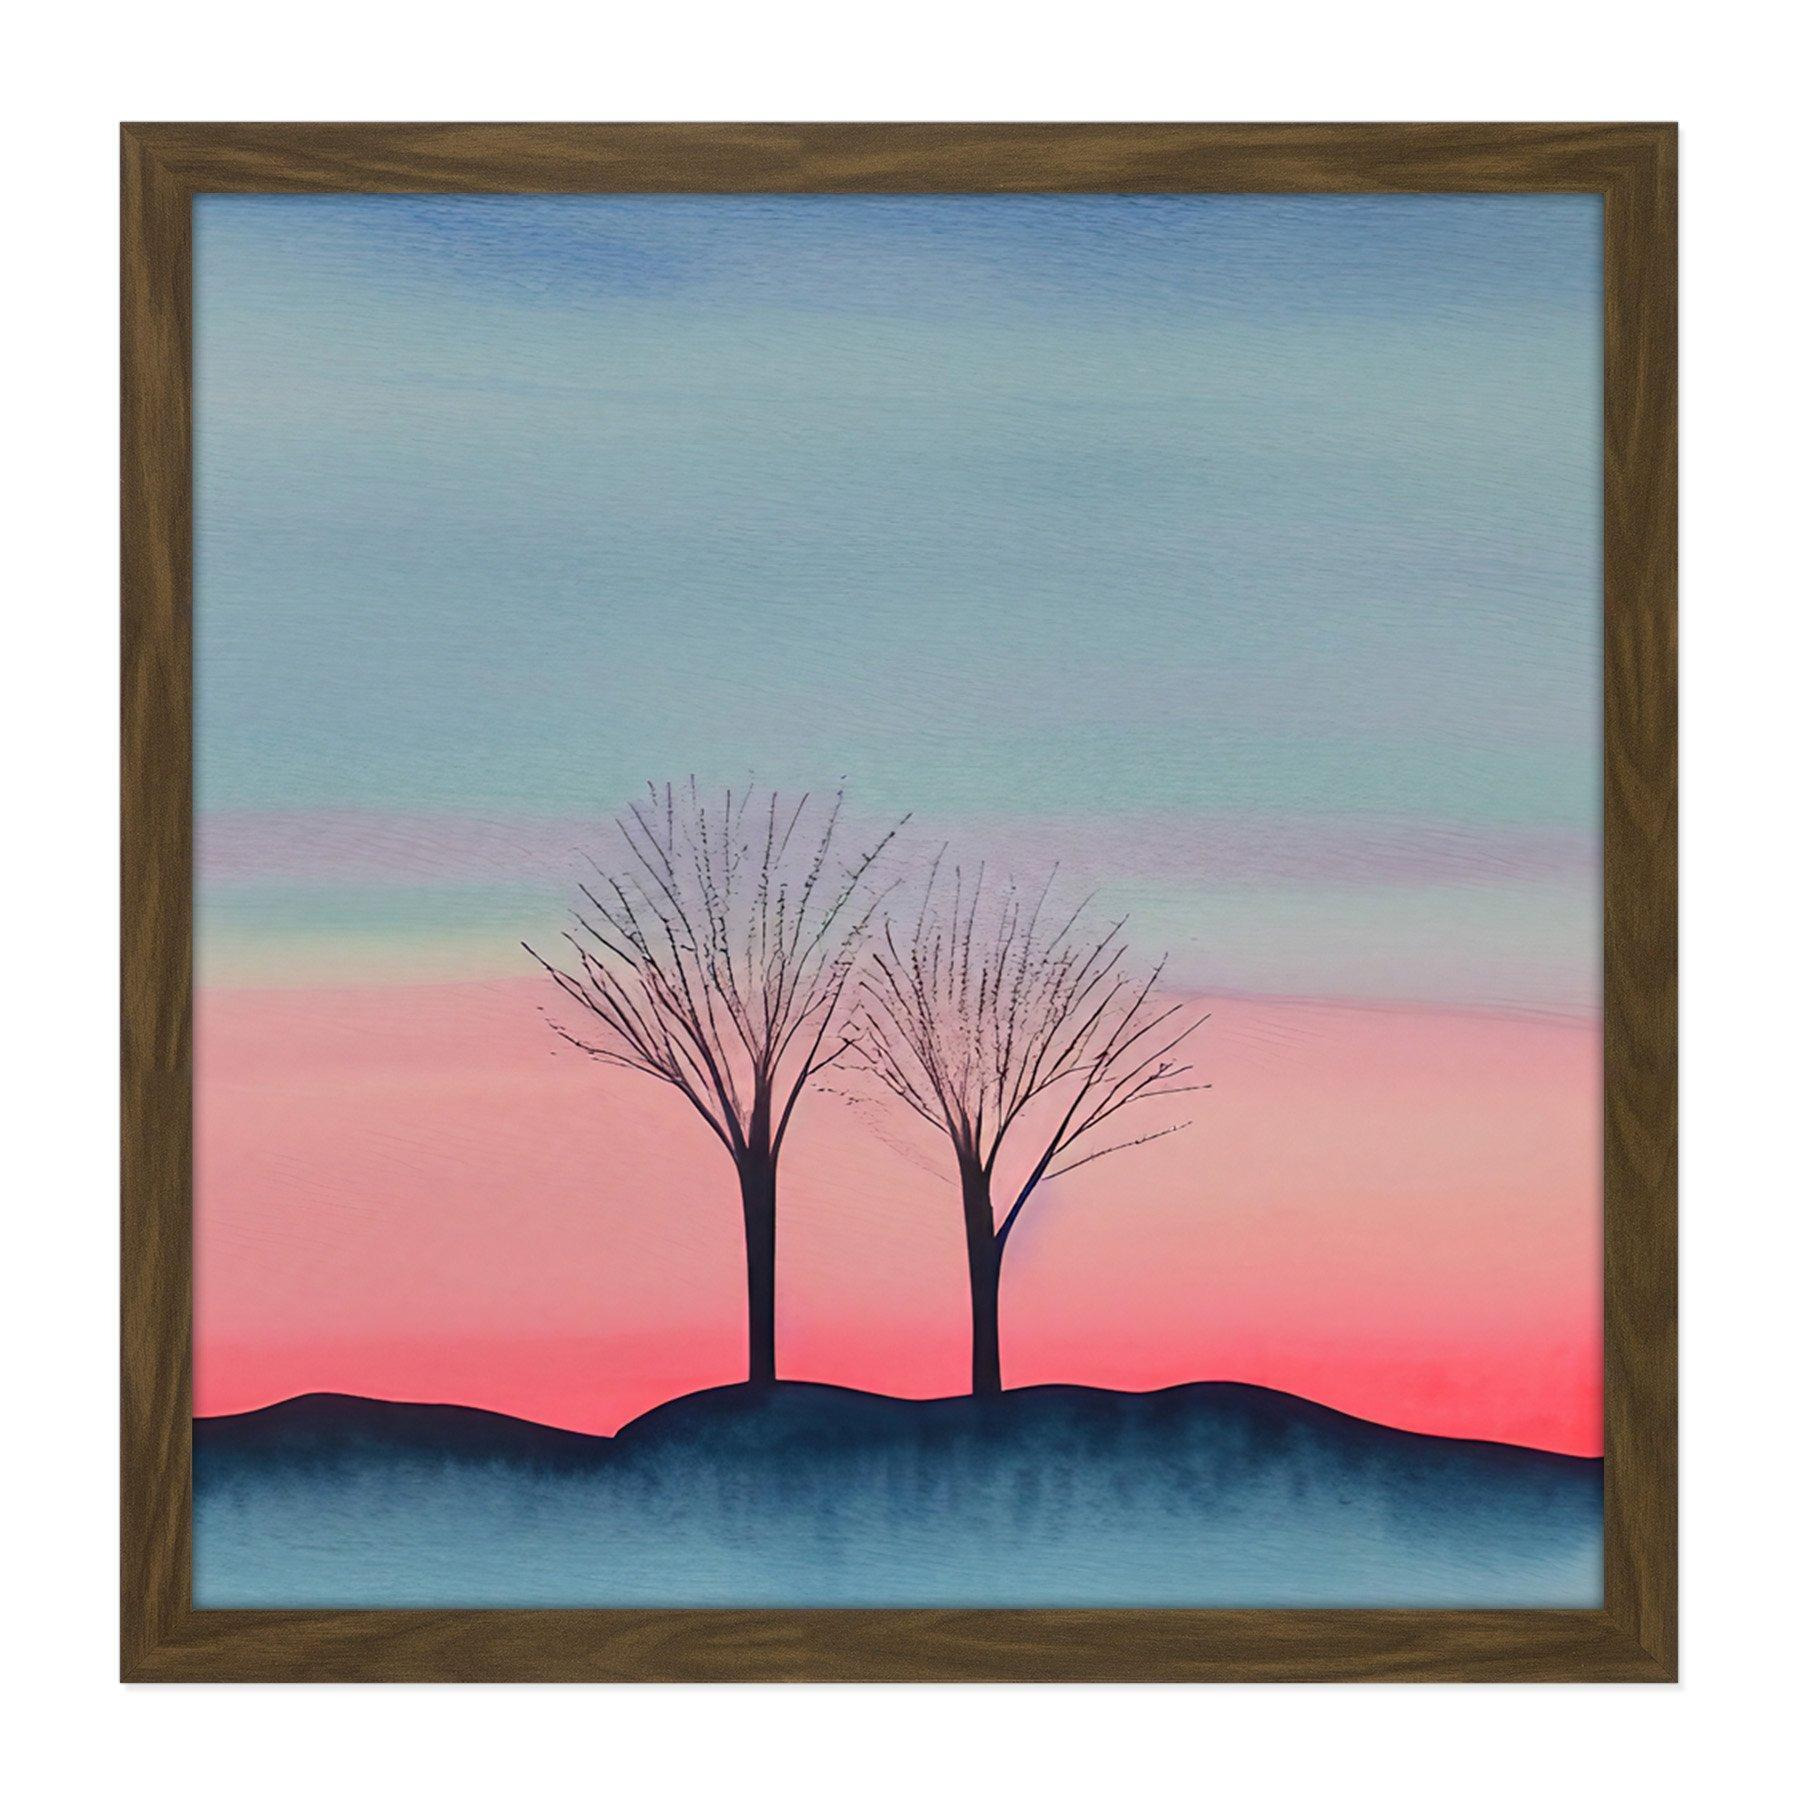 Two Winter Trees Sunset Simple Landscape Soft Watercolour Painting Square Framed Wall Art Print Picture 16X16 Inch - image 1